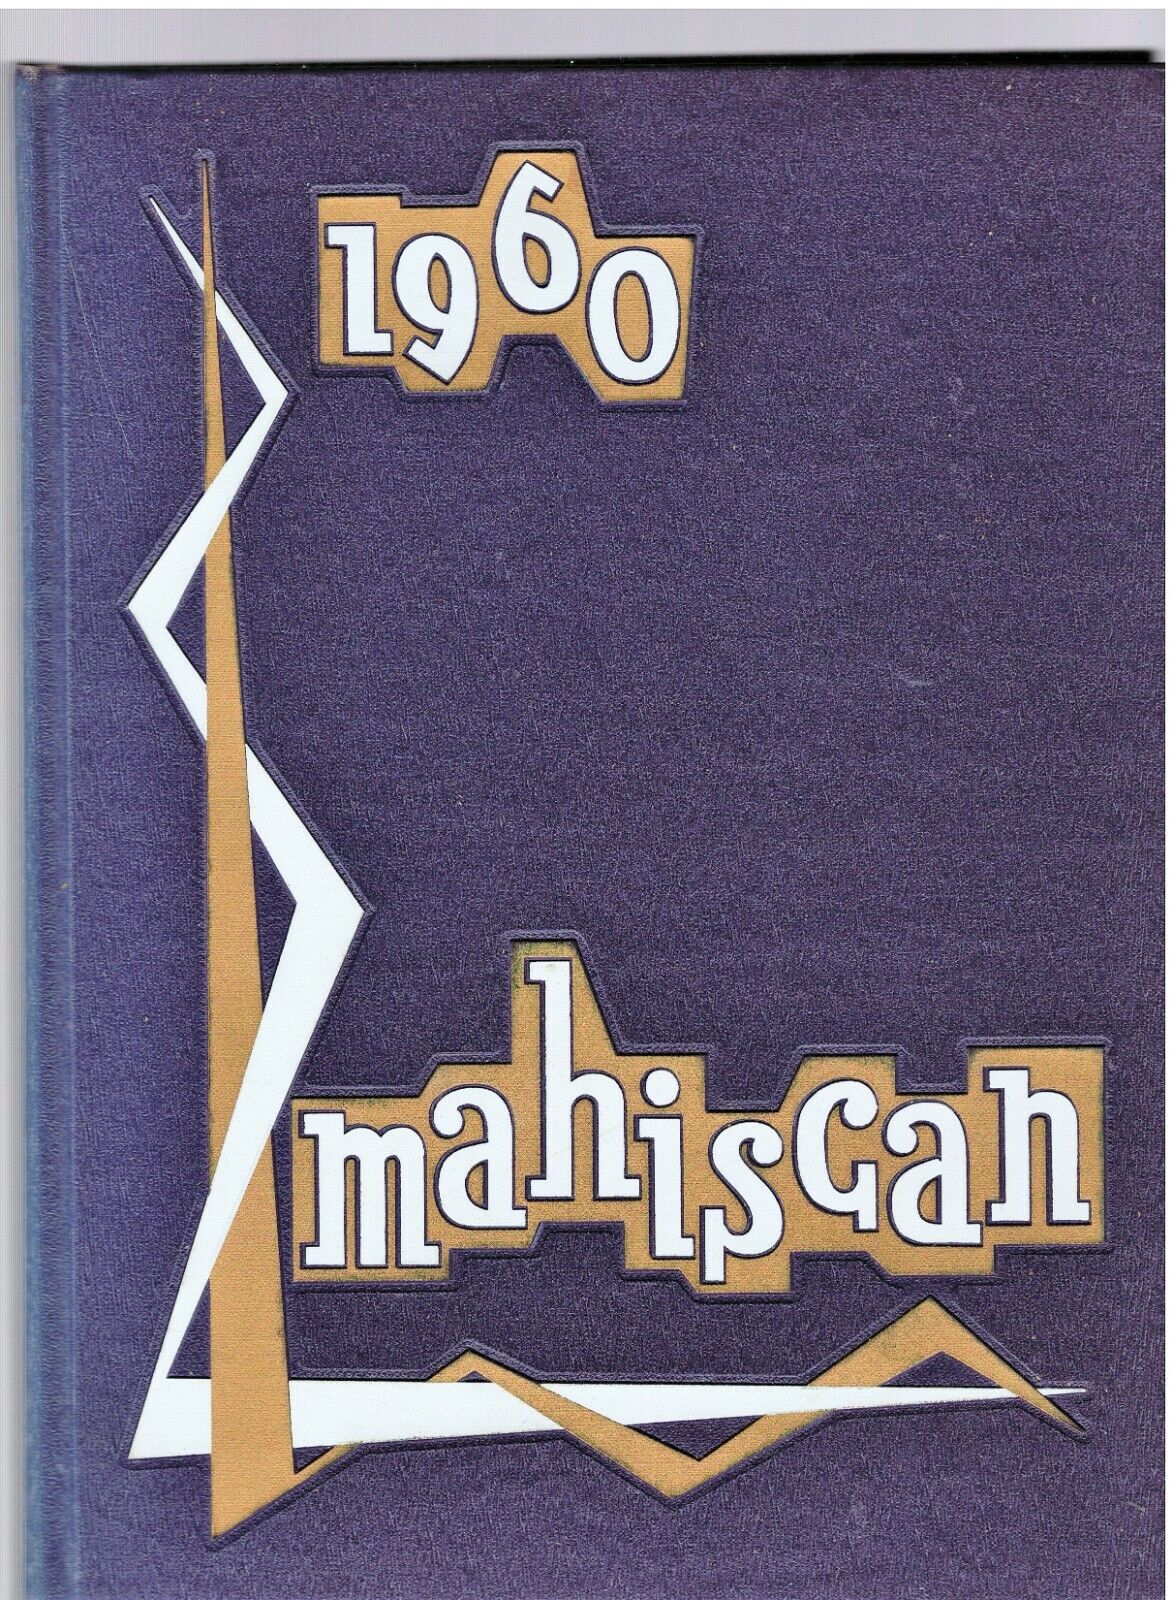 1960 Marshfield High School Yearbook, Pirates, Coos Bay, Oregon Mel Counts